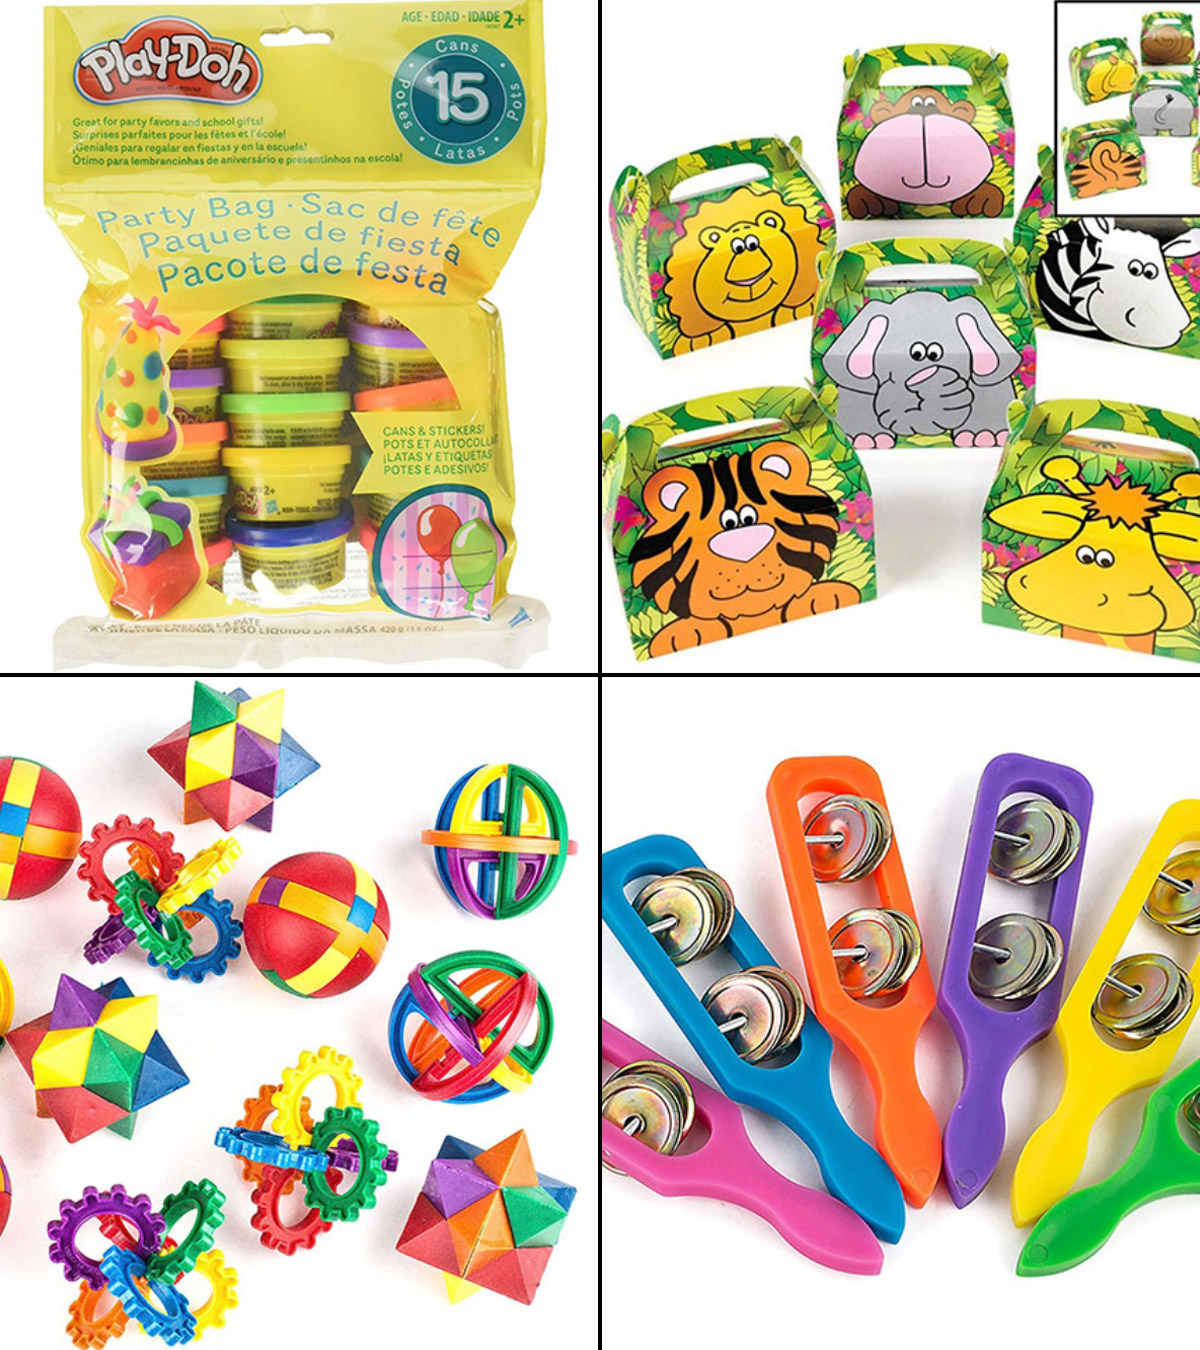 36 Return Gift Ideas for Kids on Birthday Party That They'll Love – Loveable